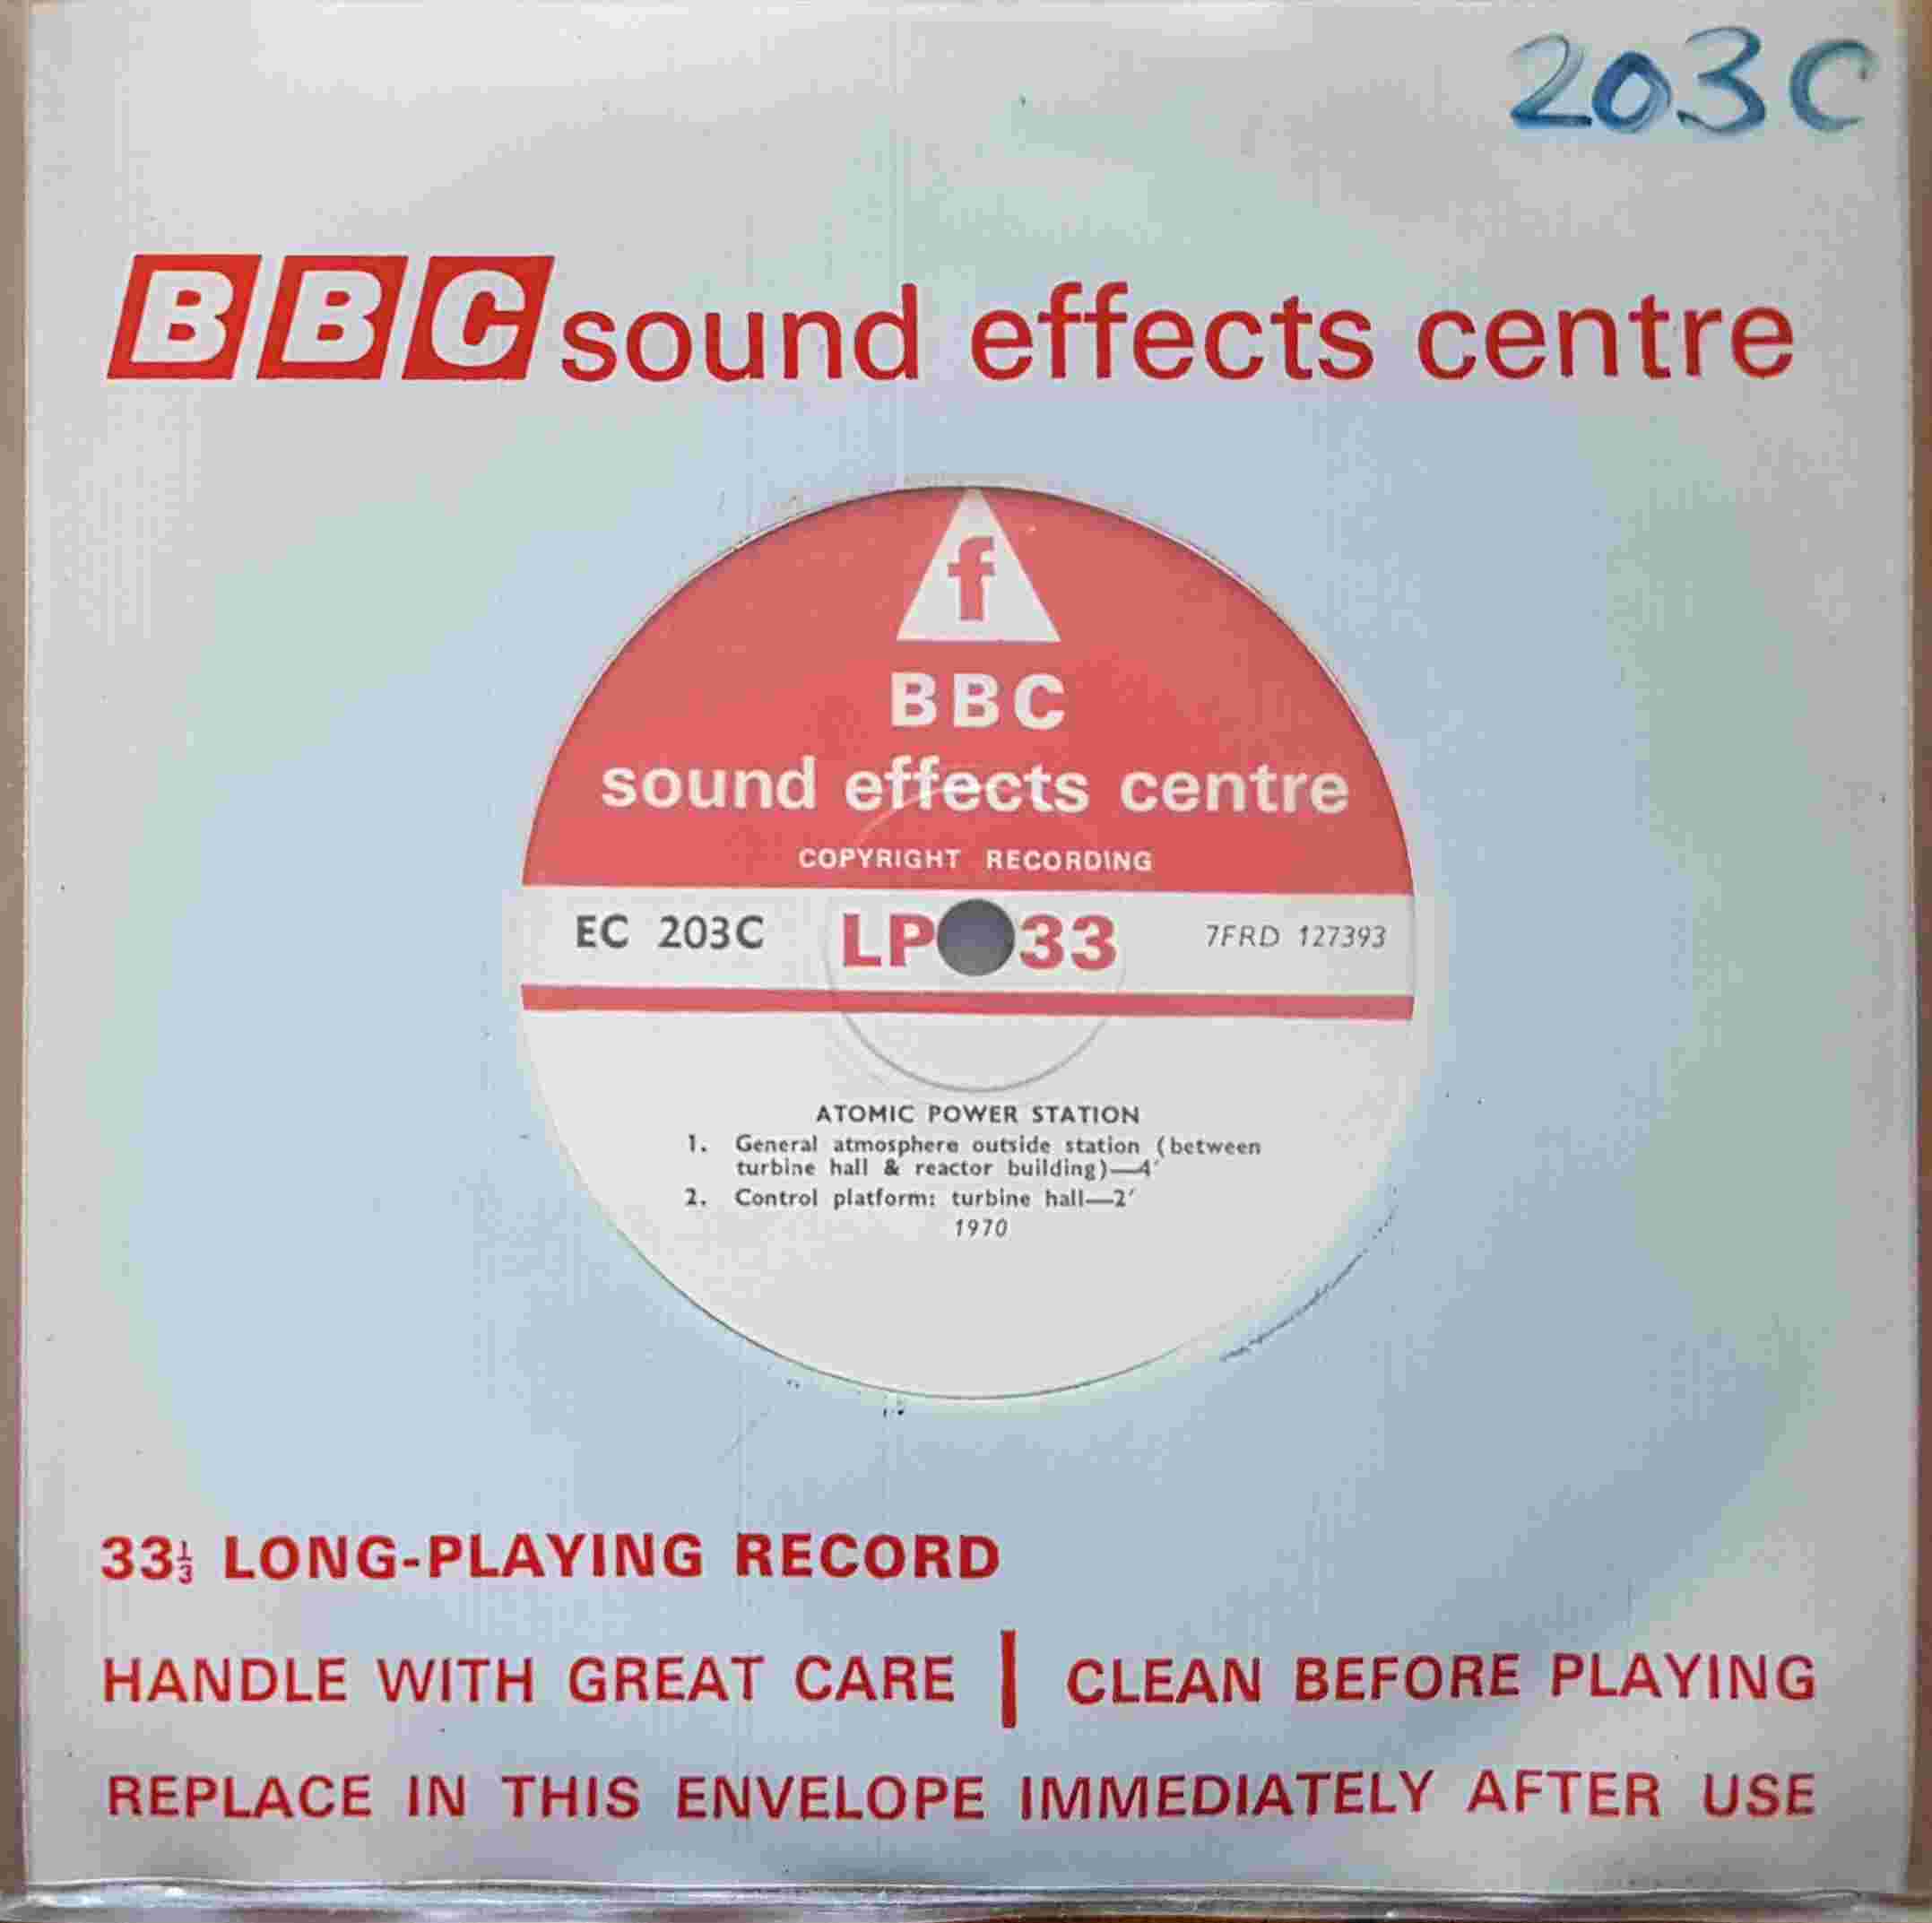 Picture of EC 203C Atomic power station by artist Not registered from the BBC records and Tapes library